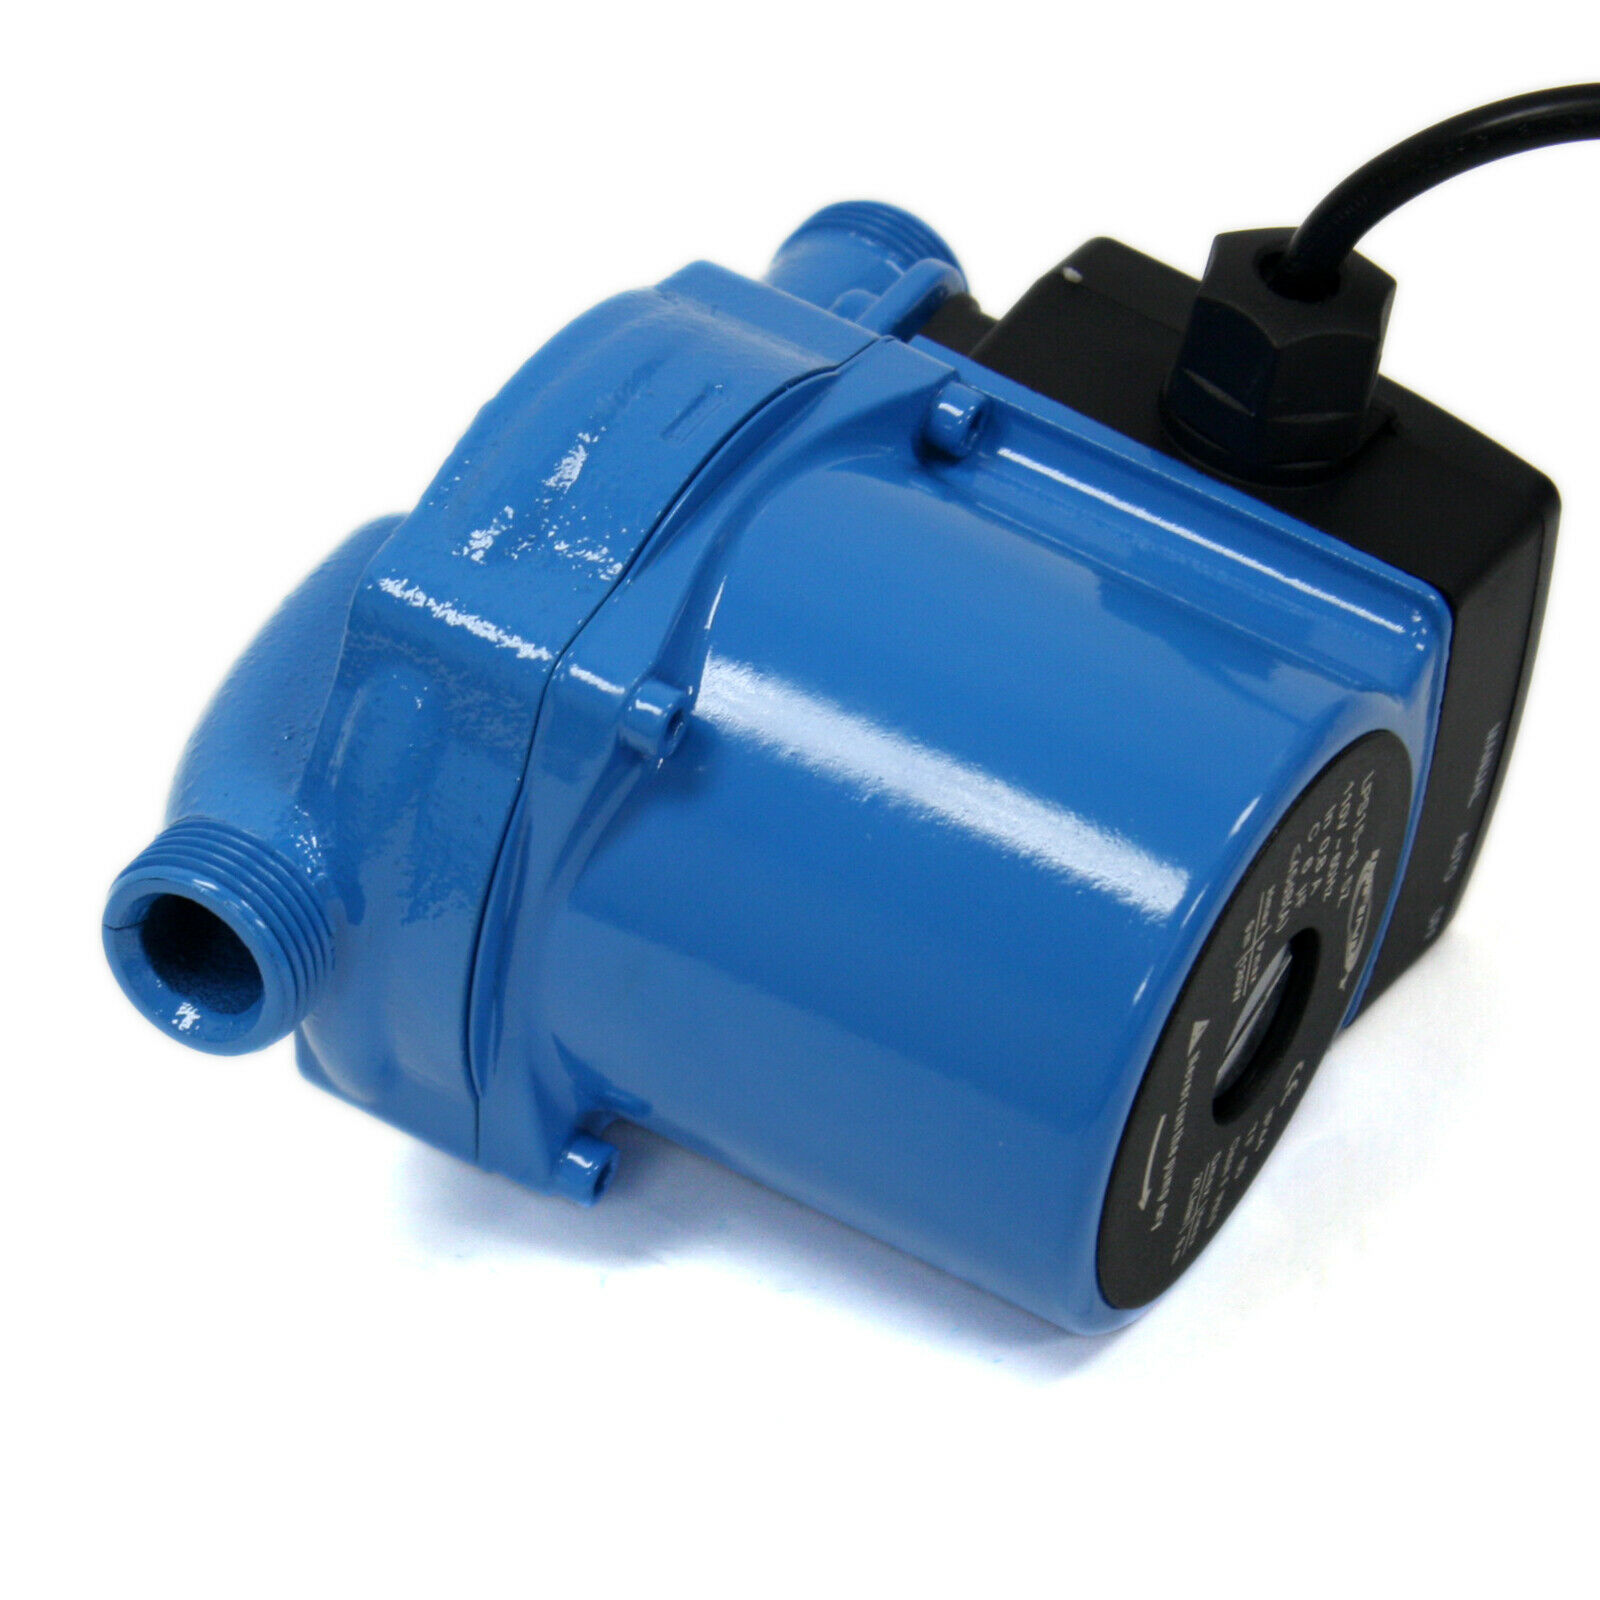 Water Pumps And Accessories 110v Automatic Booster Pump Npt 3 4 Hot